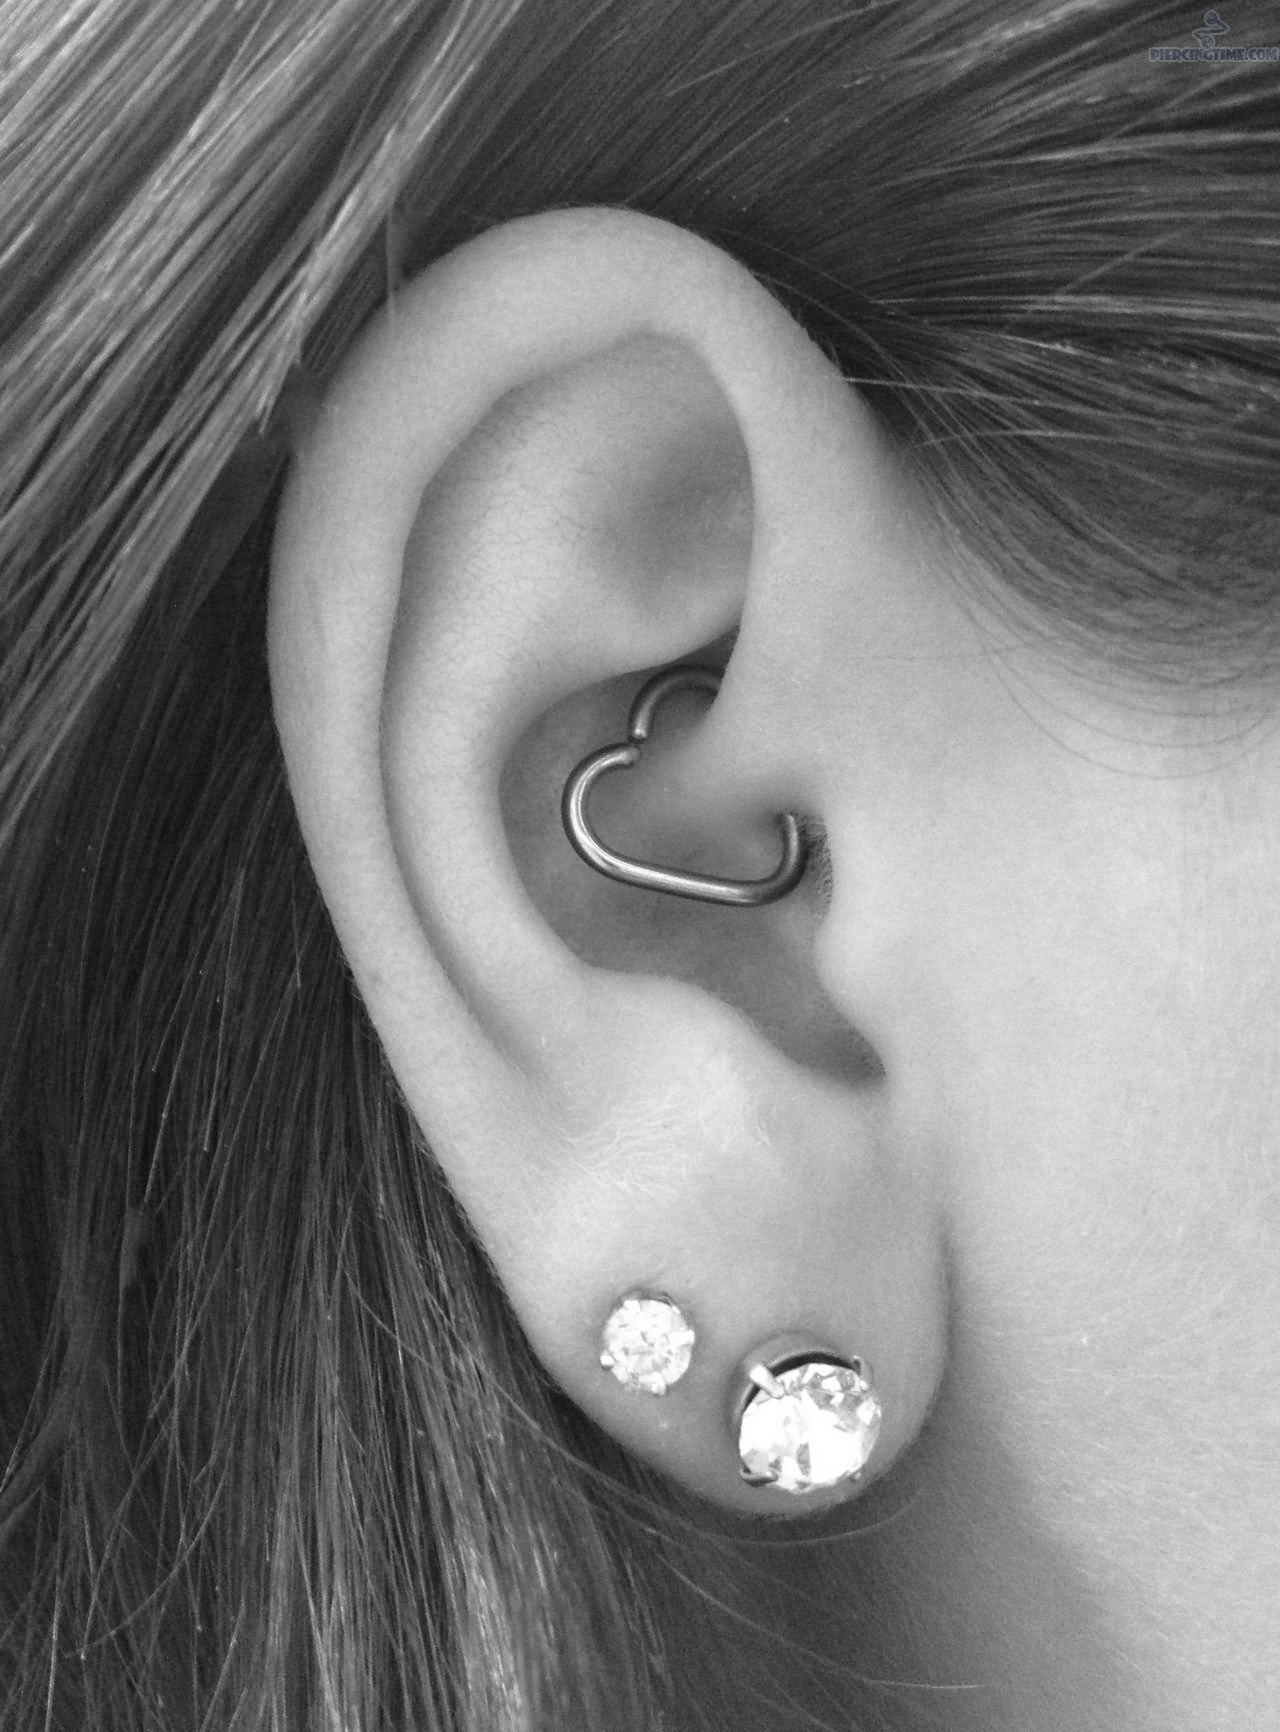 Double Lobe And Rook Heart Piercing On Right Ear